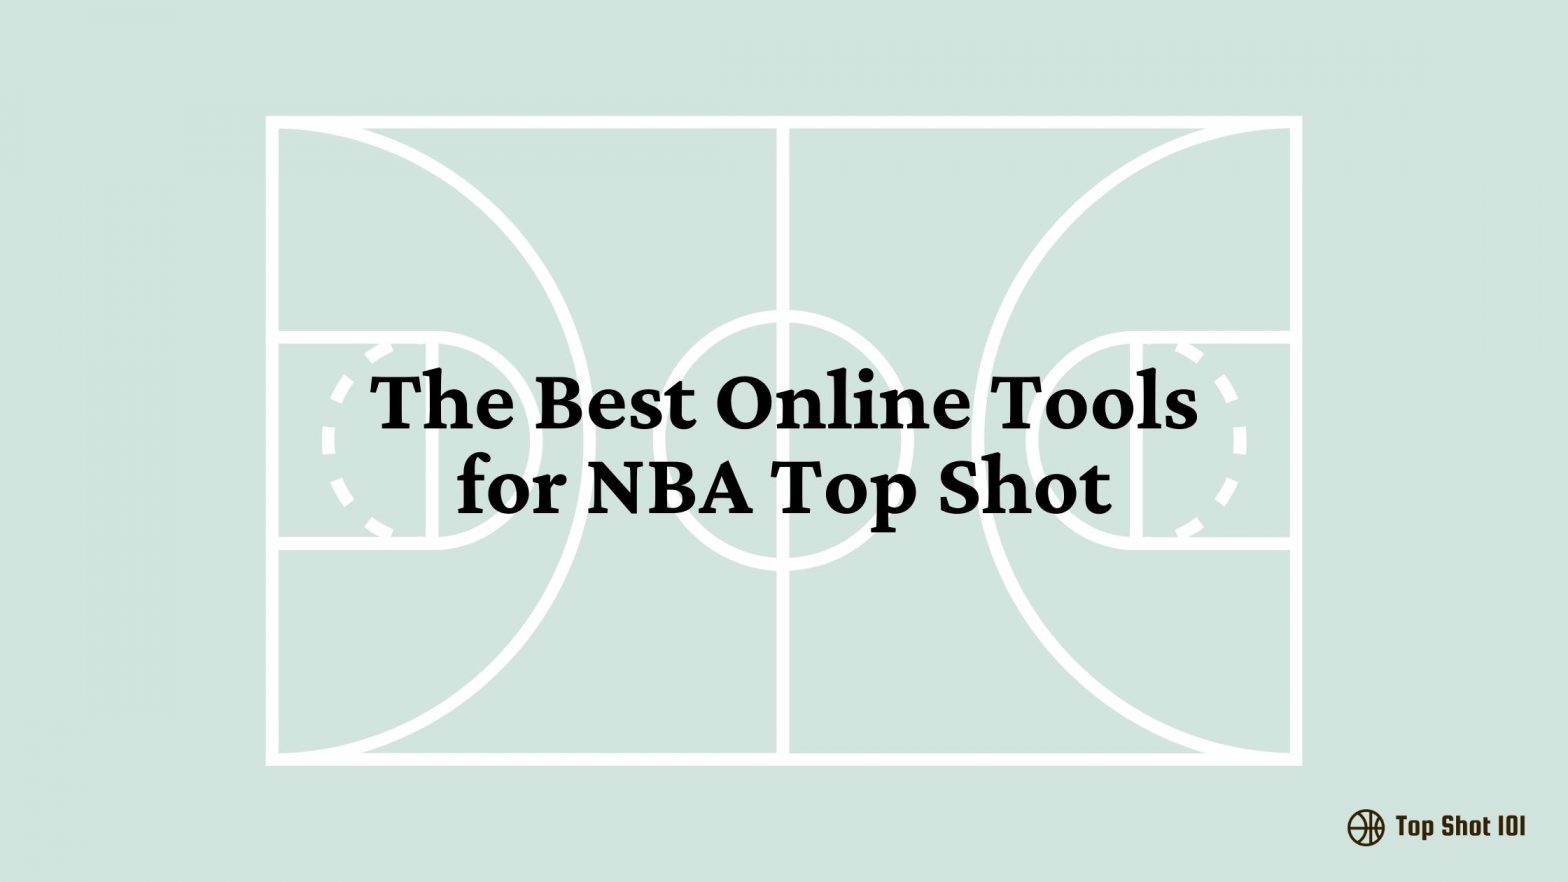 The Best Online Tools for NBA Top Shot